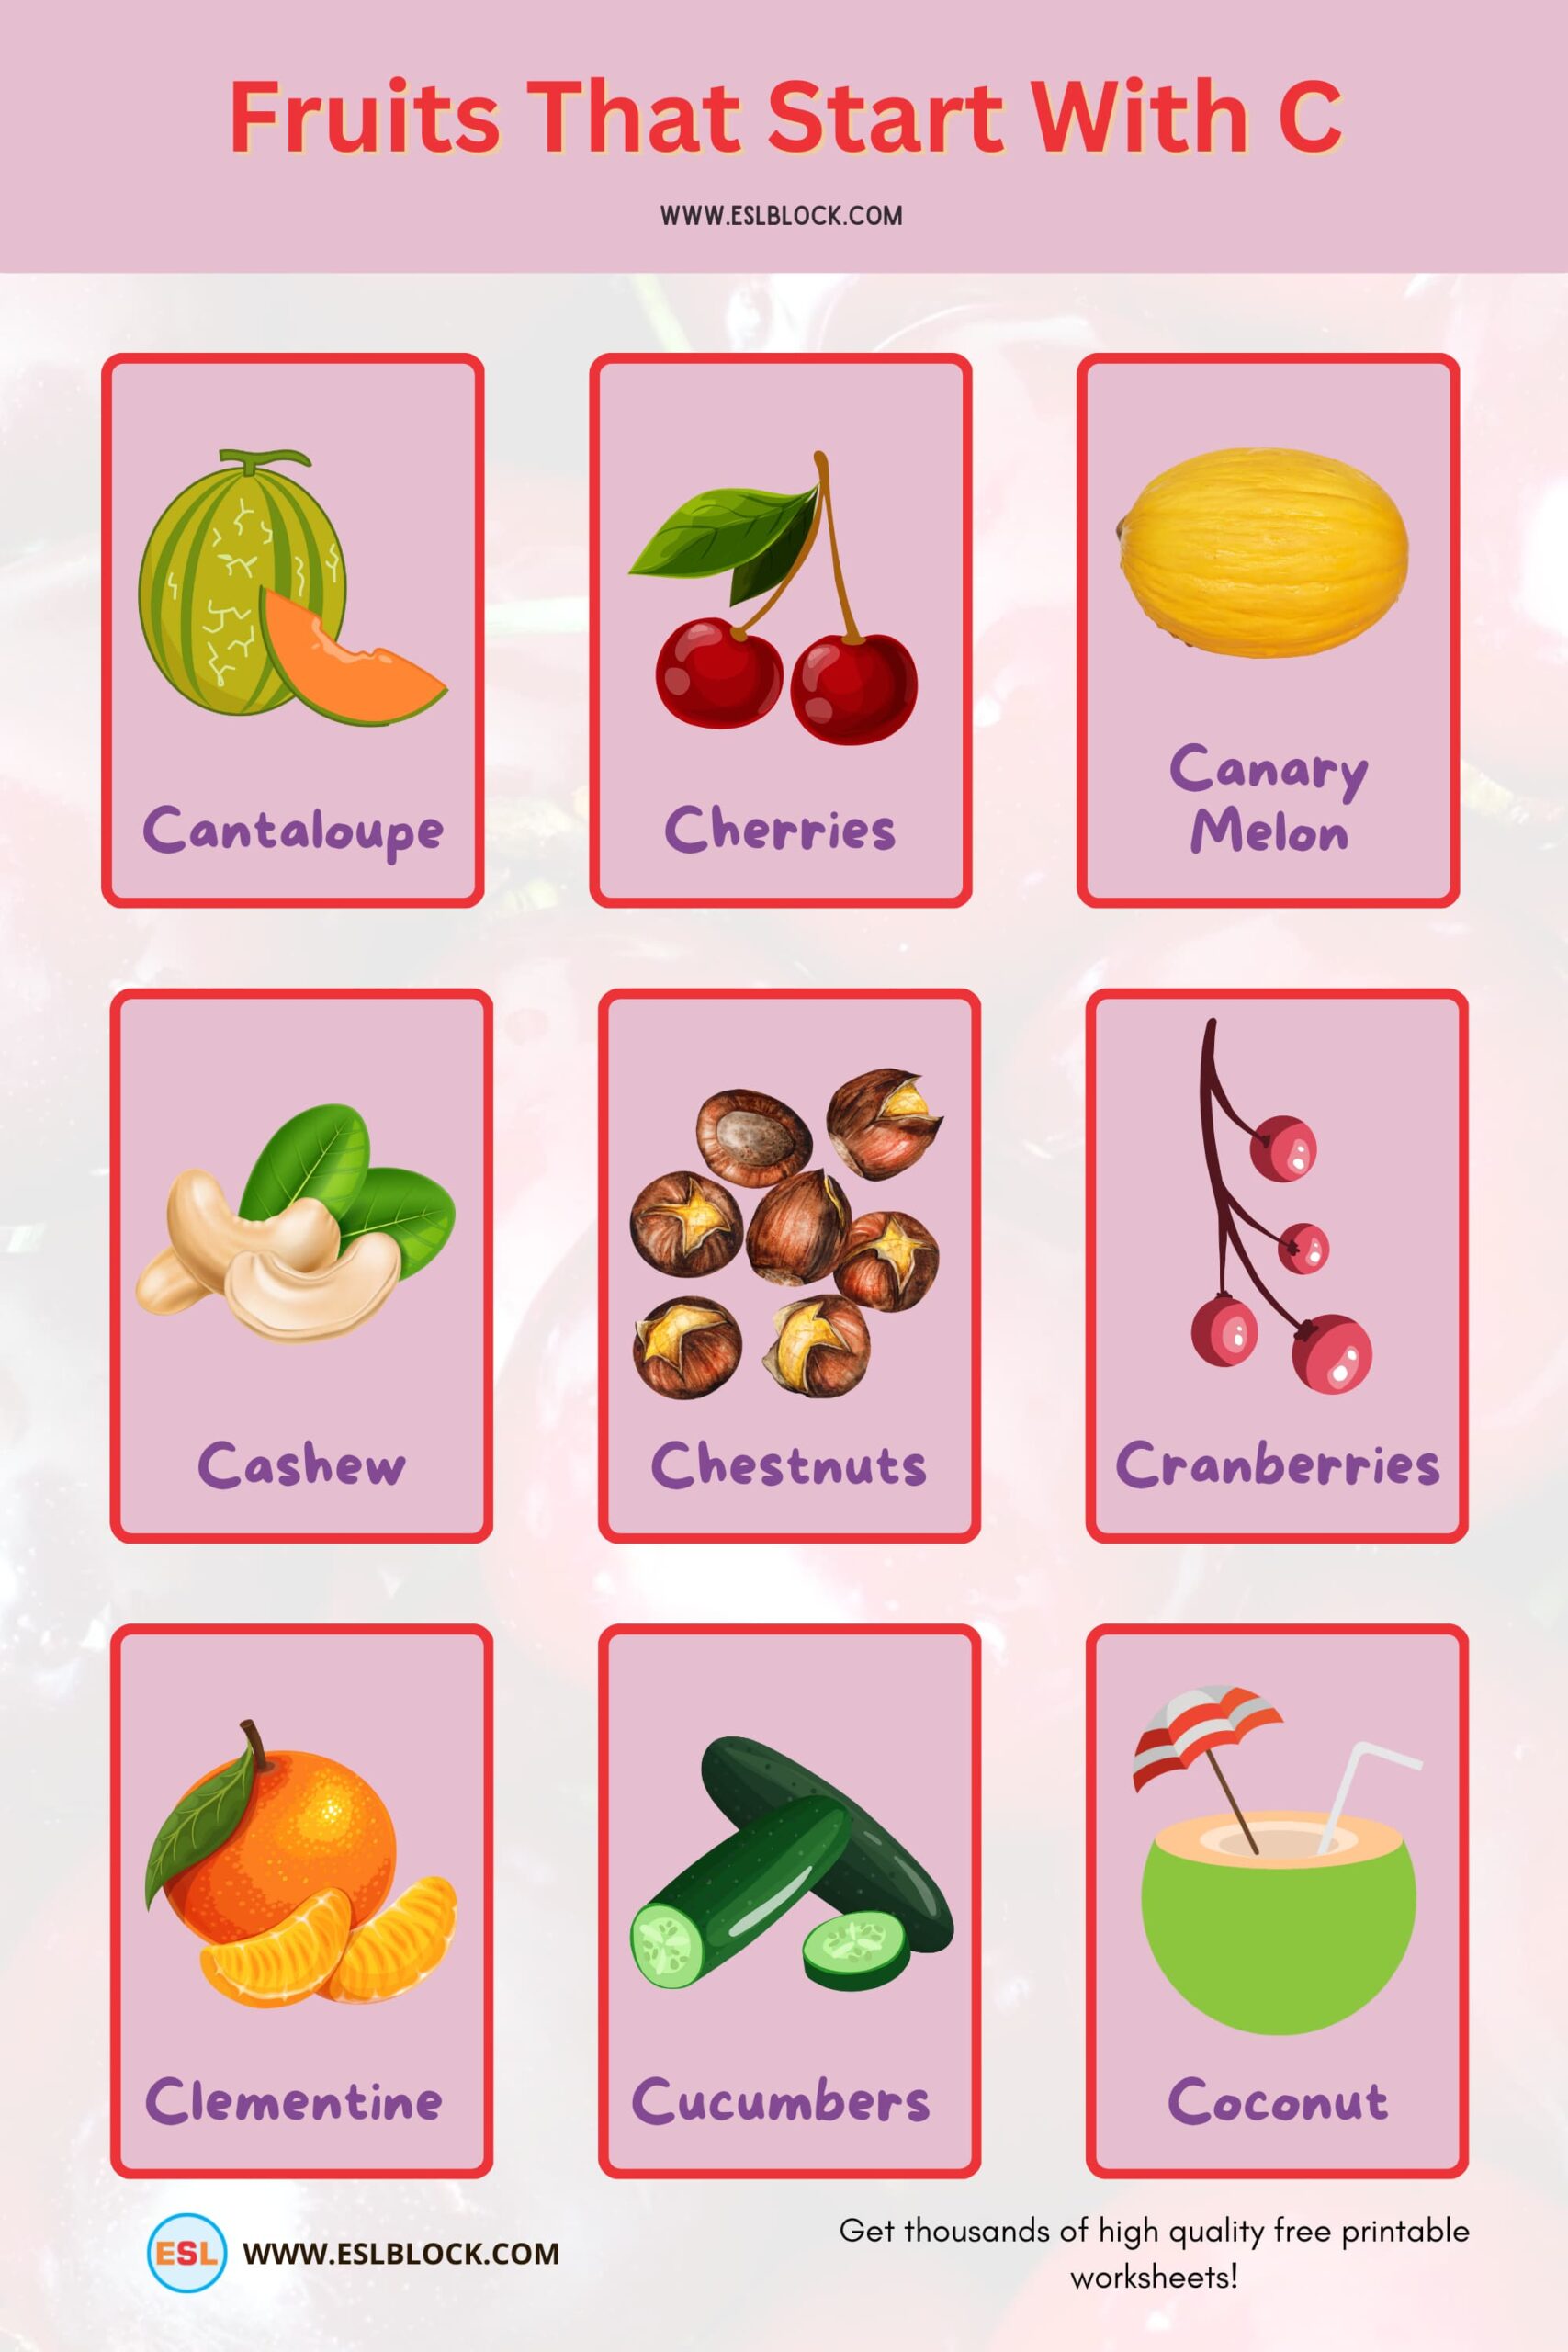 A to Z Fruits Names, Animals, English, English Nouns, English Vocabulary, English Words, Fruits List, Fruits Names, List of Fruits, Nouns, Vocabulary, Fruits that start with C 1